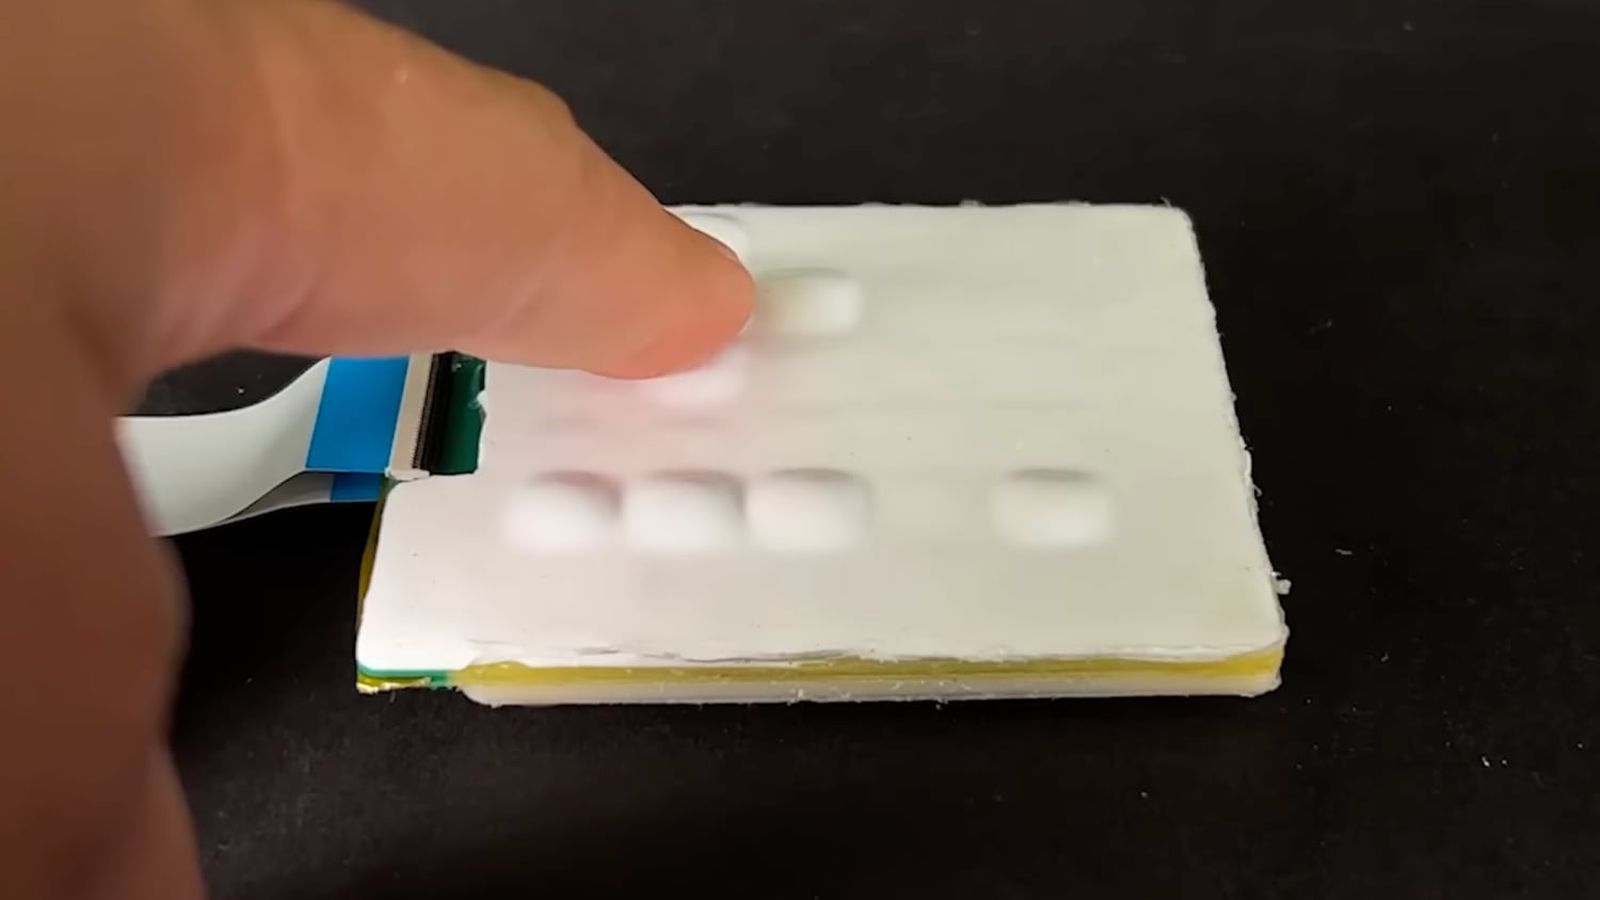 Researchers Develop New Tactile Technology That Could Enable a Pop-Up Keyboard on a Flat Smartphone Display - macrumors.com